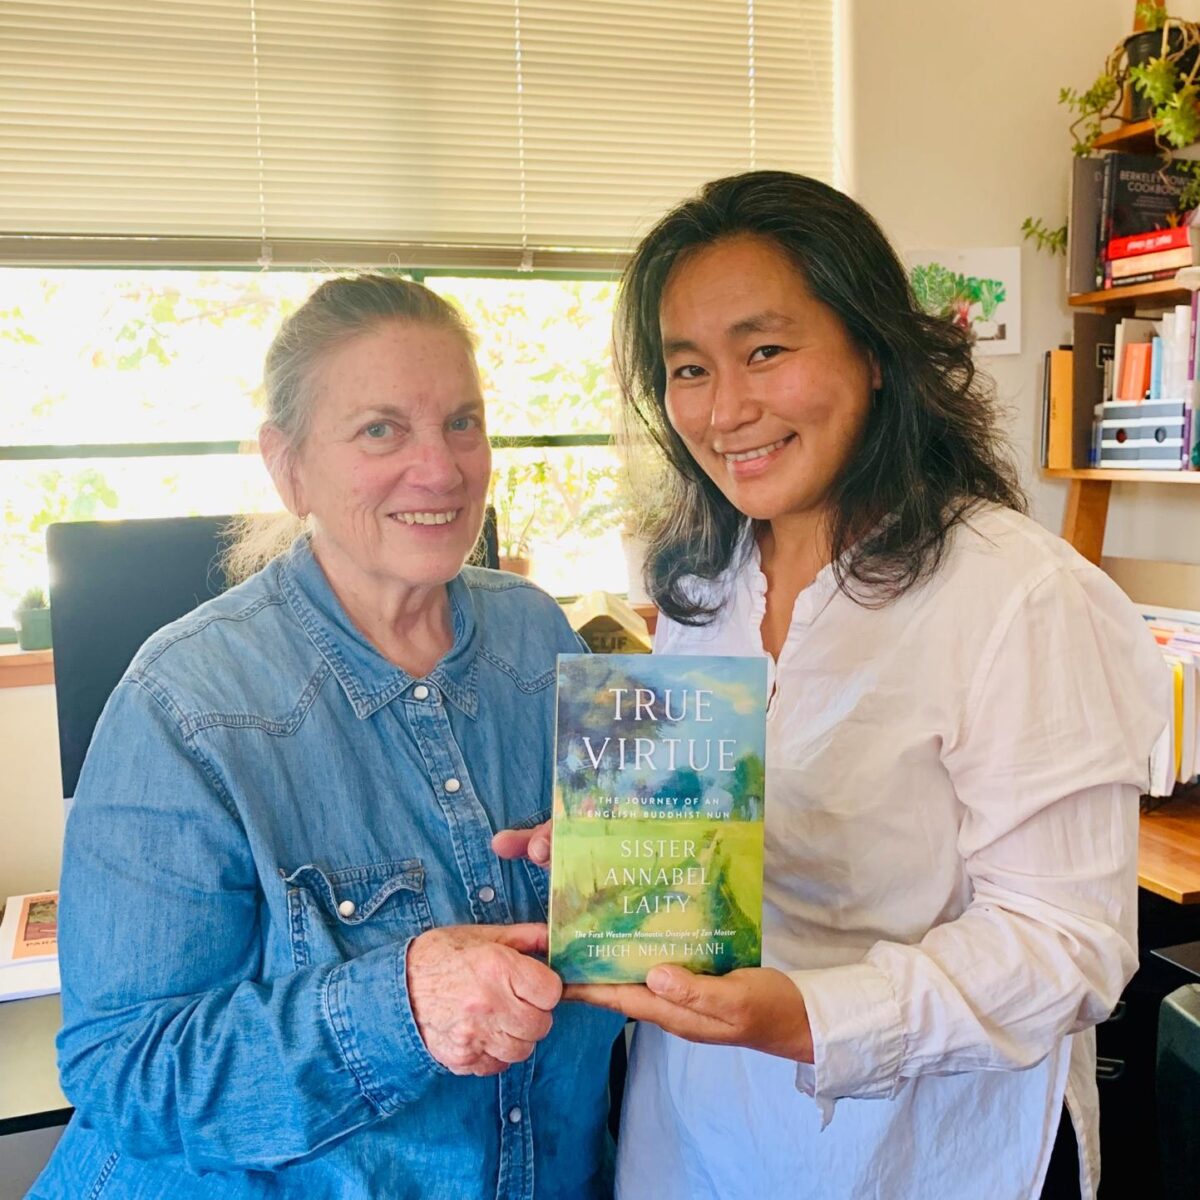 Terry Barber and Hisae Matsuda, smiling and holding a copy of book True Virtue